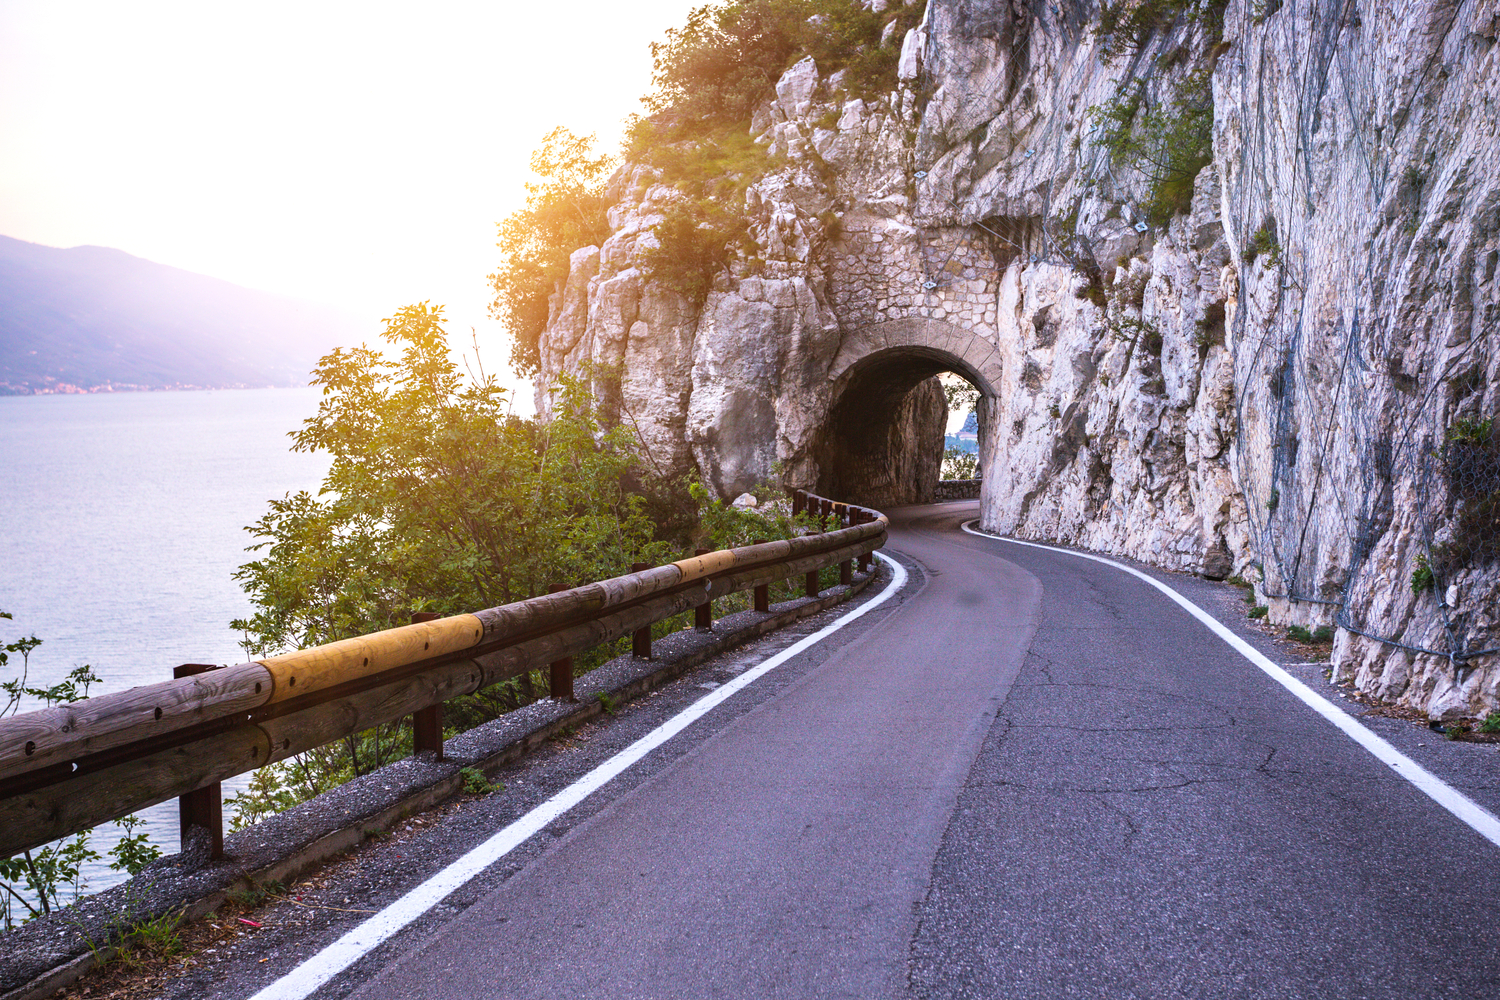 The Strada della Forra turns 110: considered the most beautiful scenic route in the world